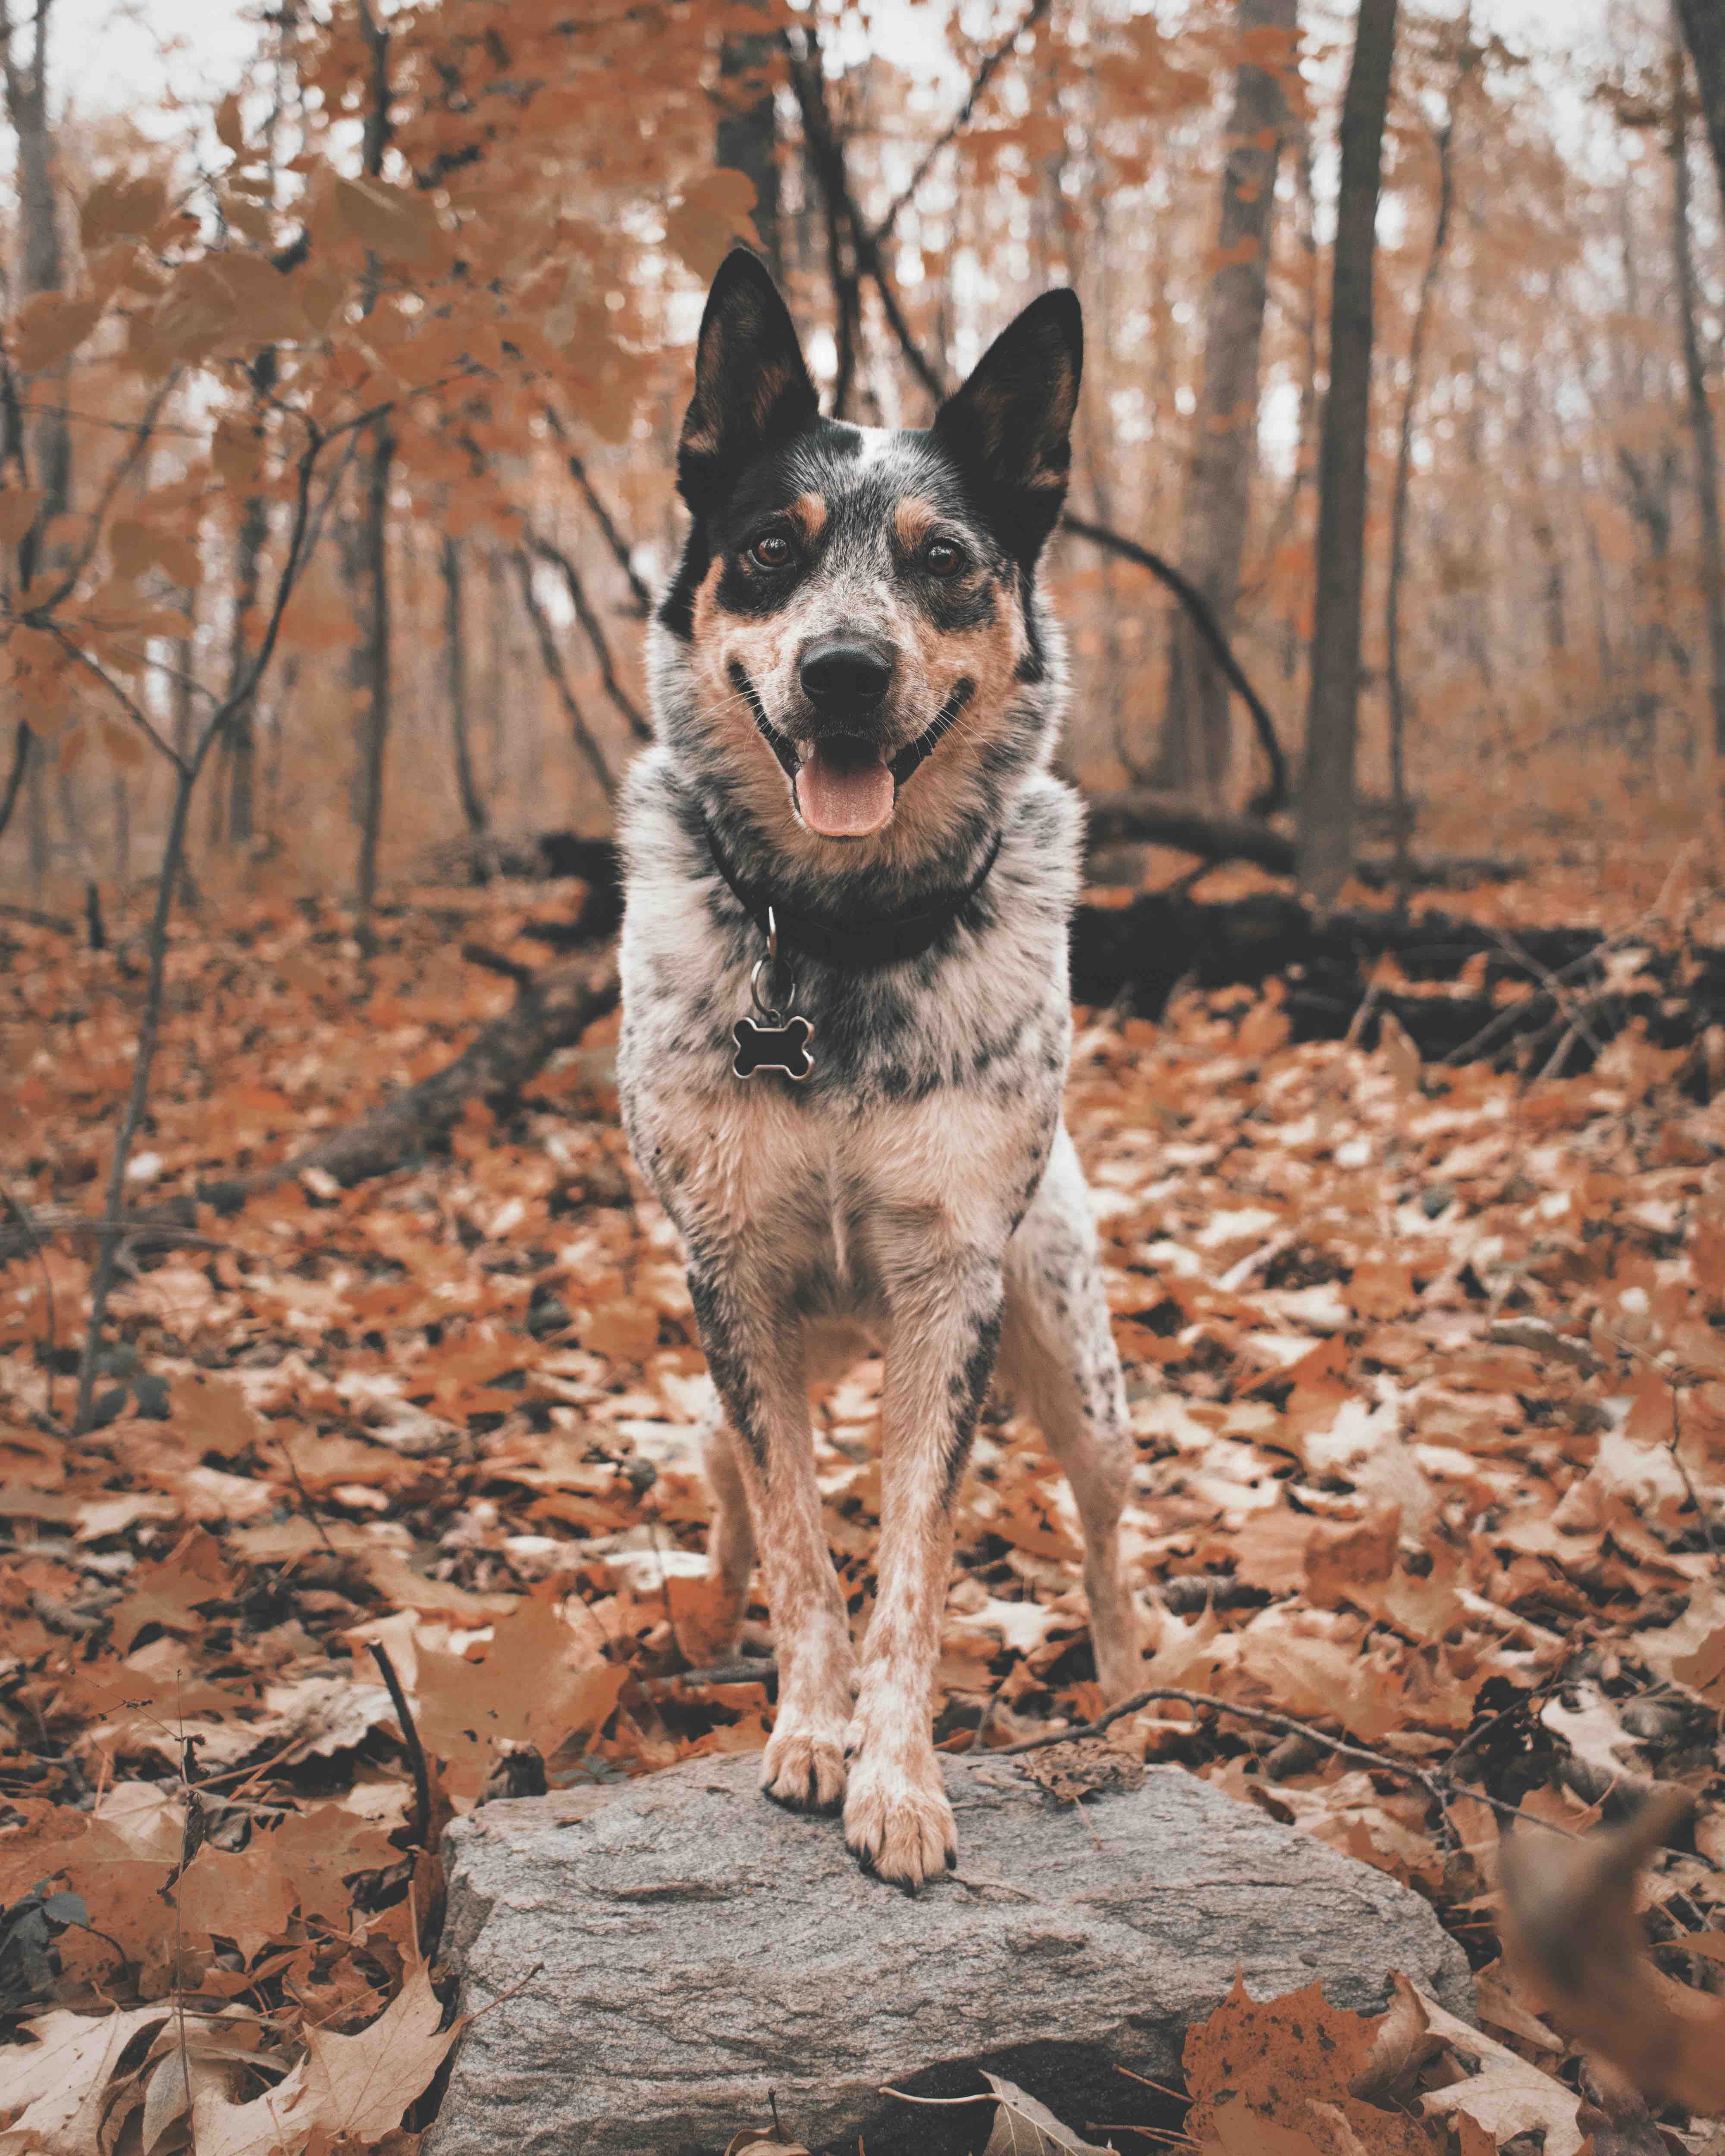 Picture of a dog in the leaves, photo by Daniel Lincoln, via Unsplash